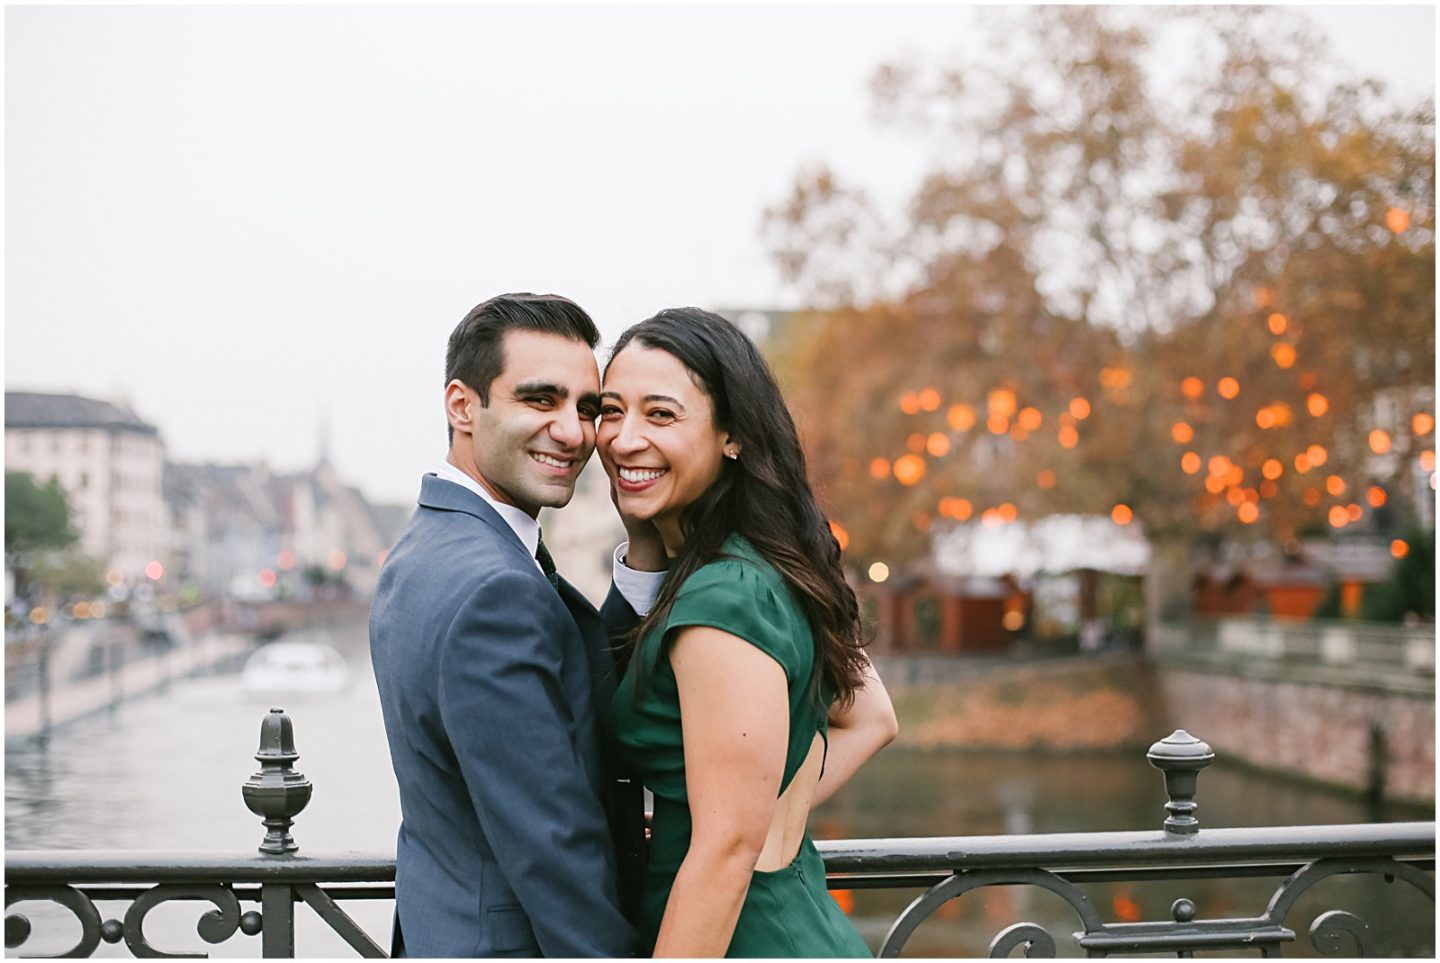 couple at engagement photo session in strasbourg france christmas markets